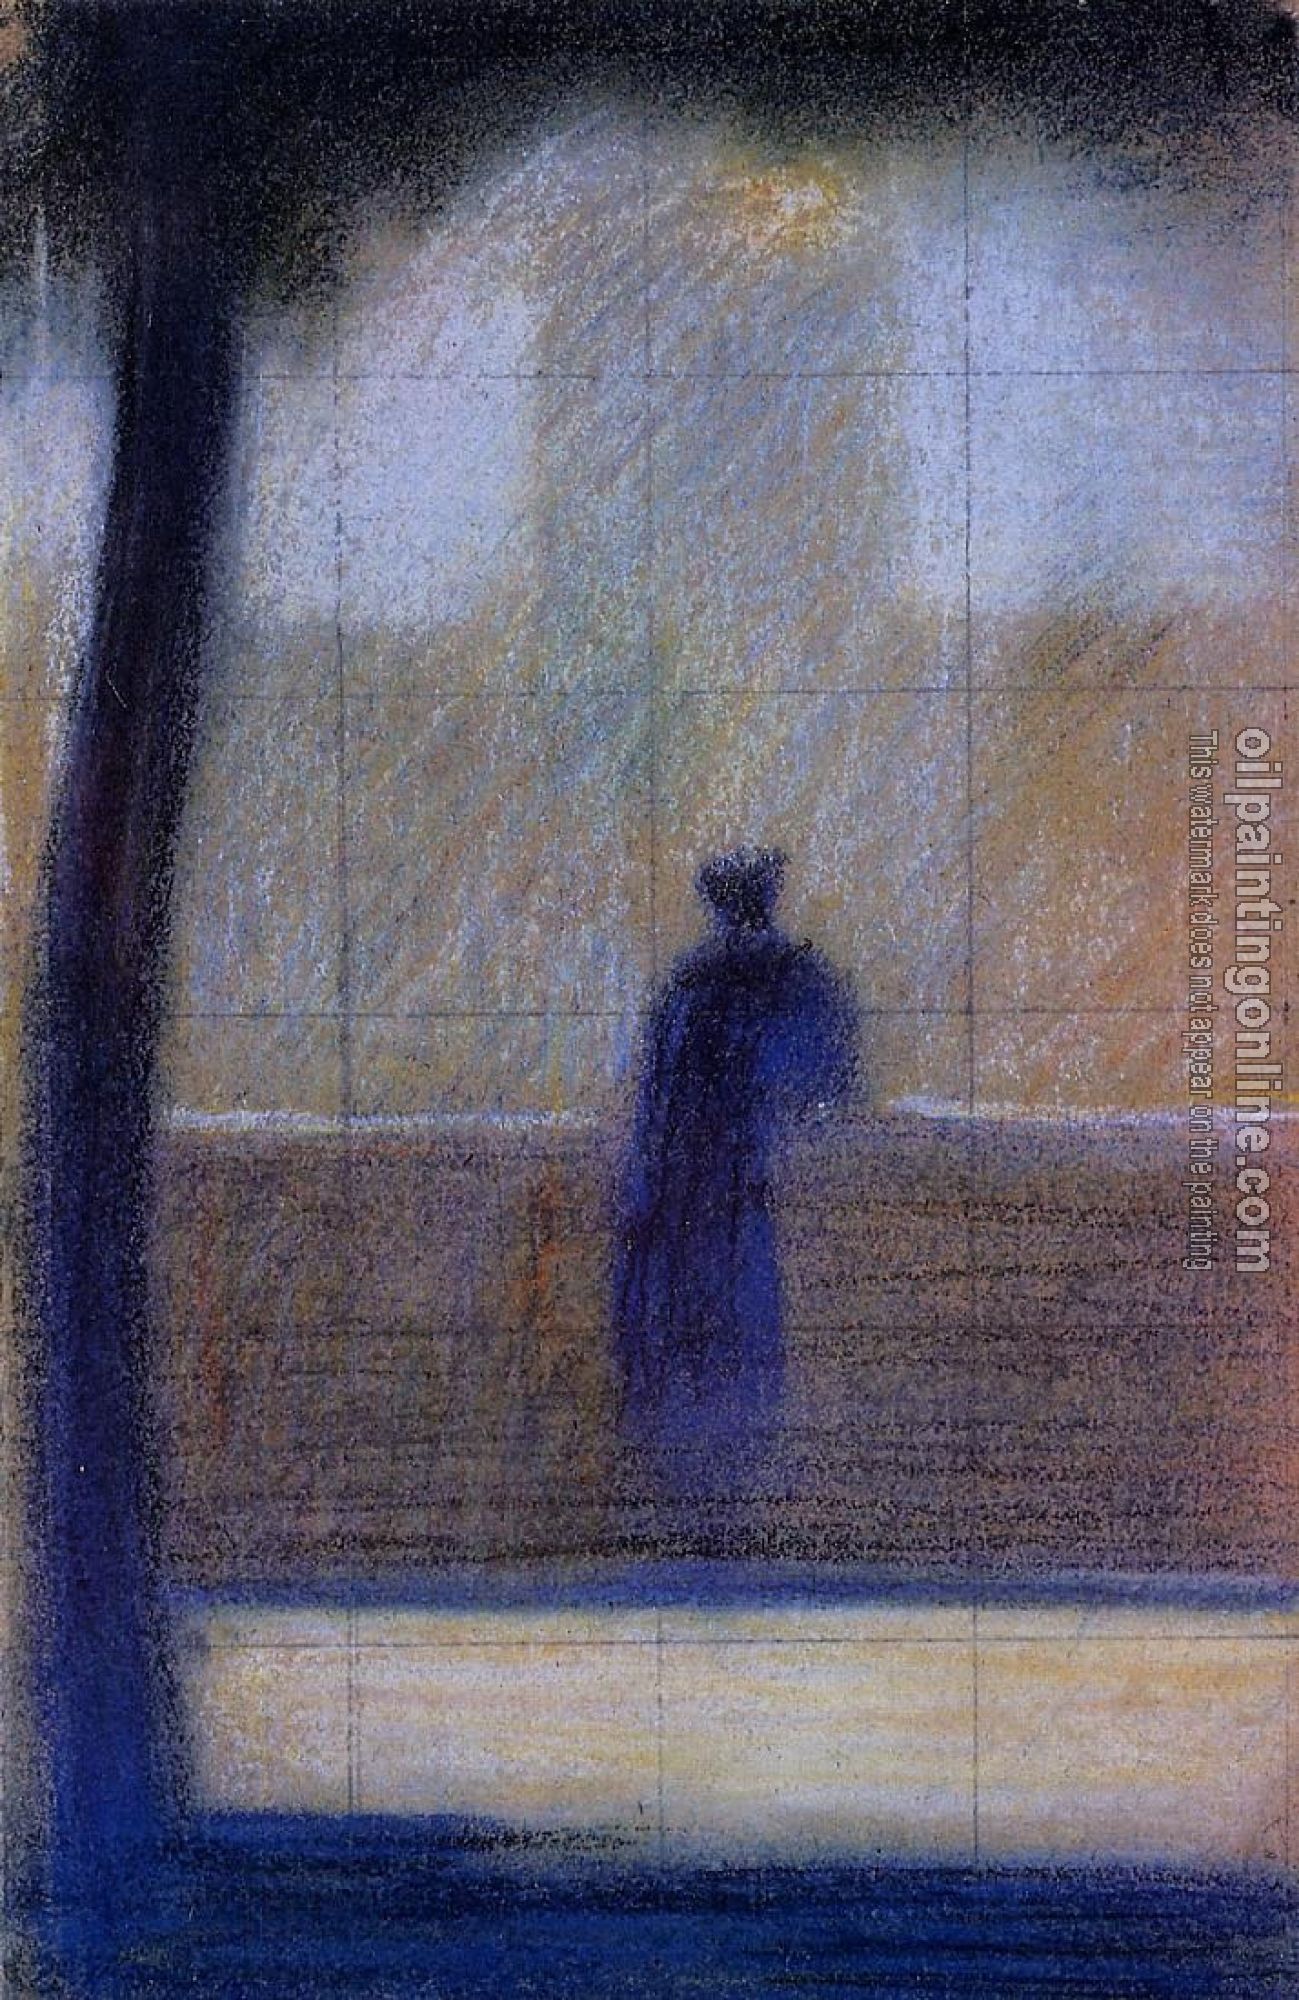 Seurat, Georges - Man Leaning on a Parapet